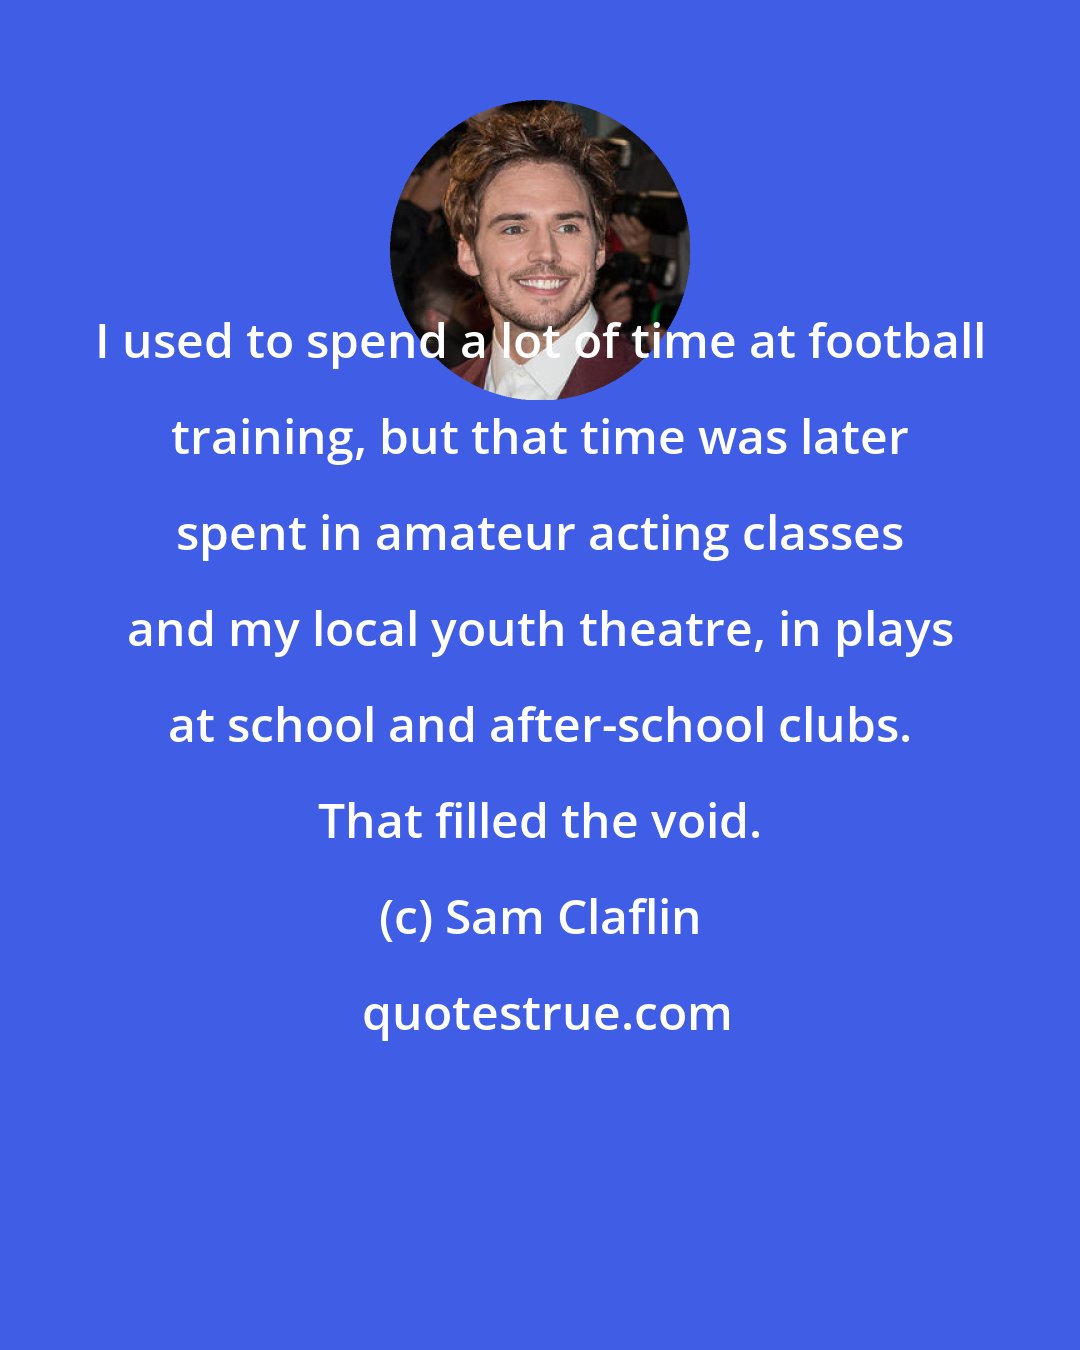 Sam Claflin: I used to spend a lot of time at football training, but that time was later spent in amateur acting classes and my local youth theatre, in plays at school and after-school clubs. That filled the void.